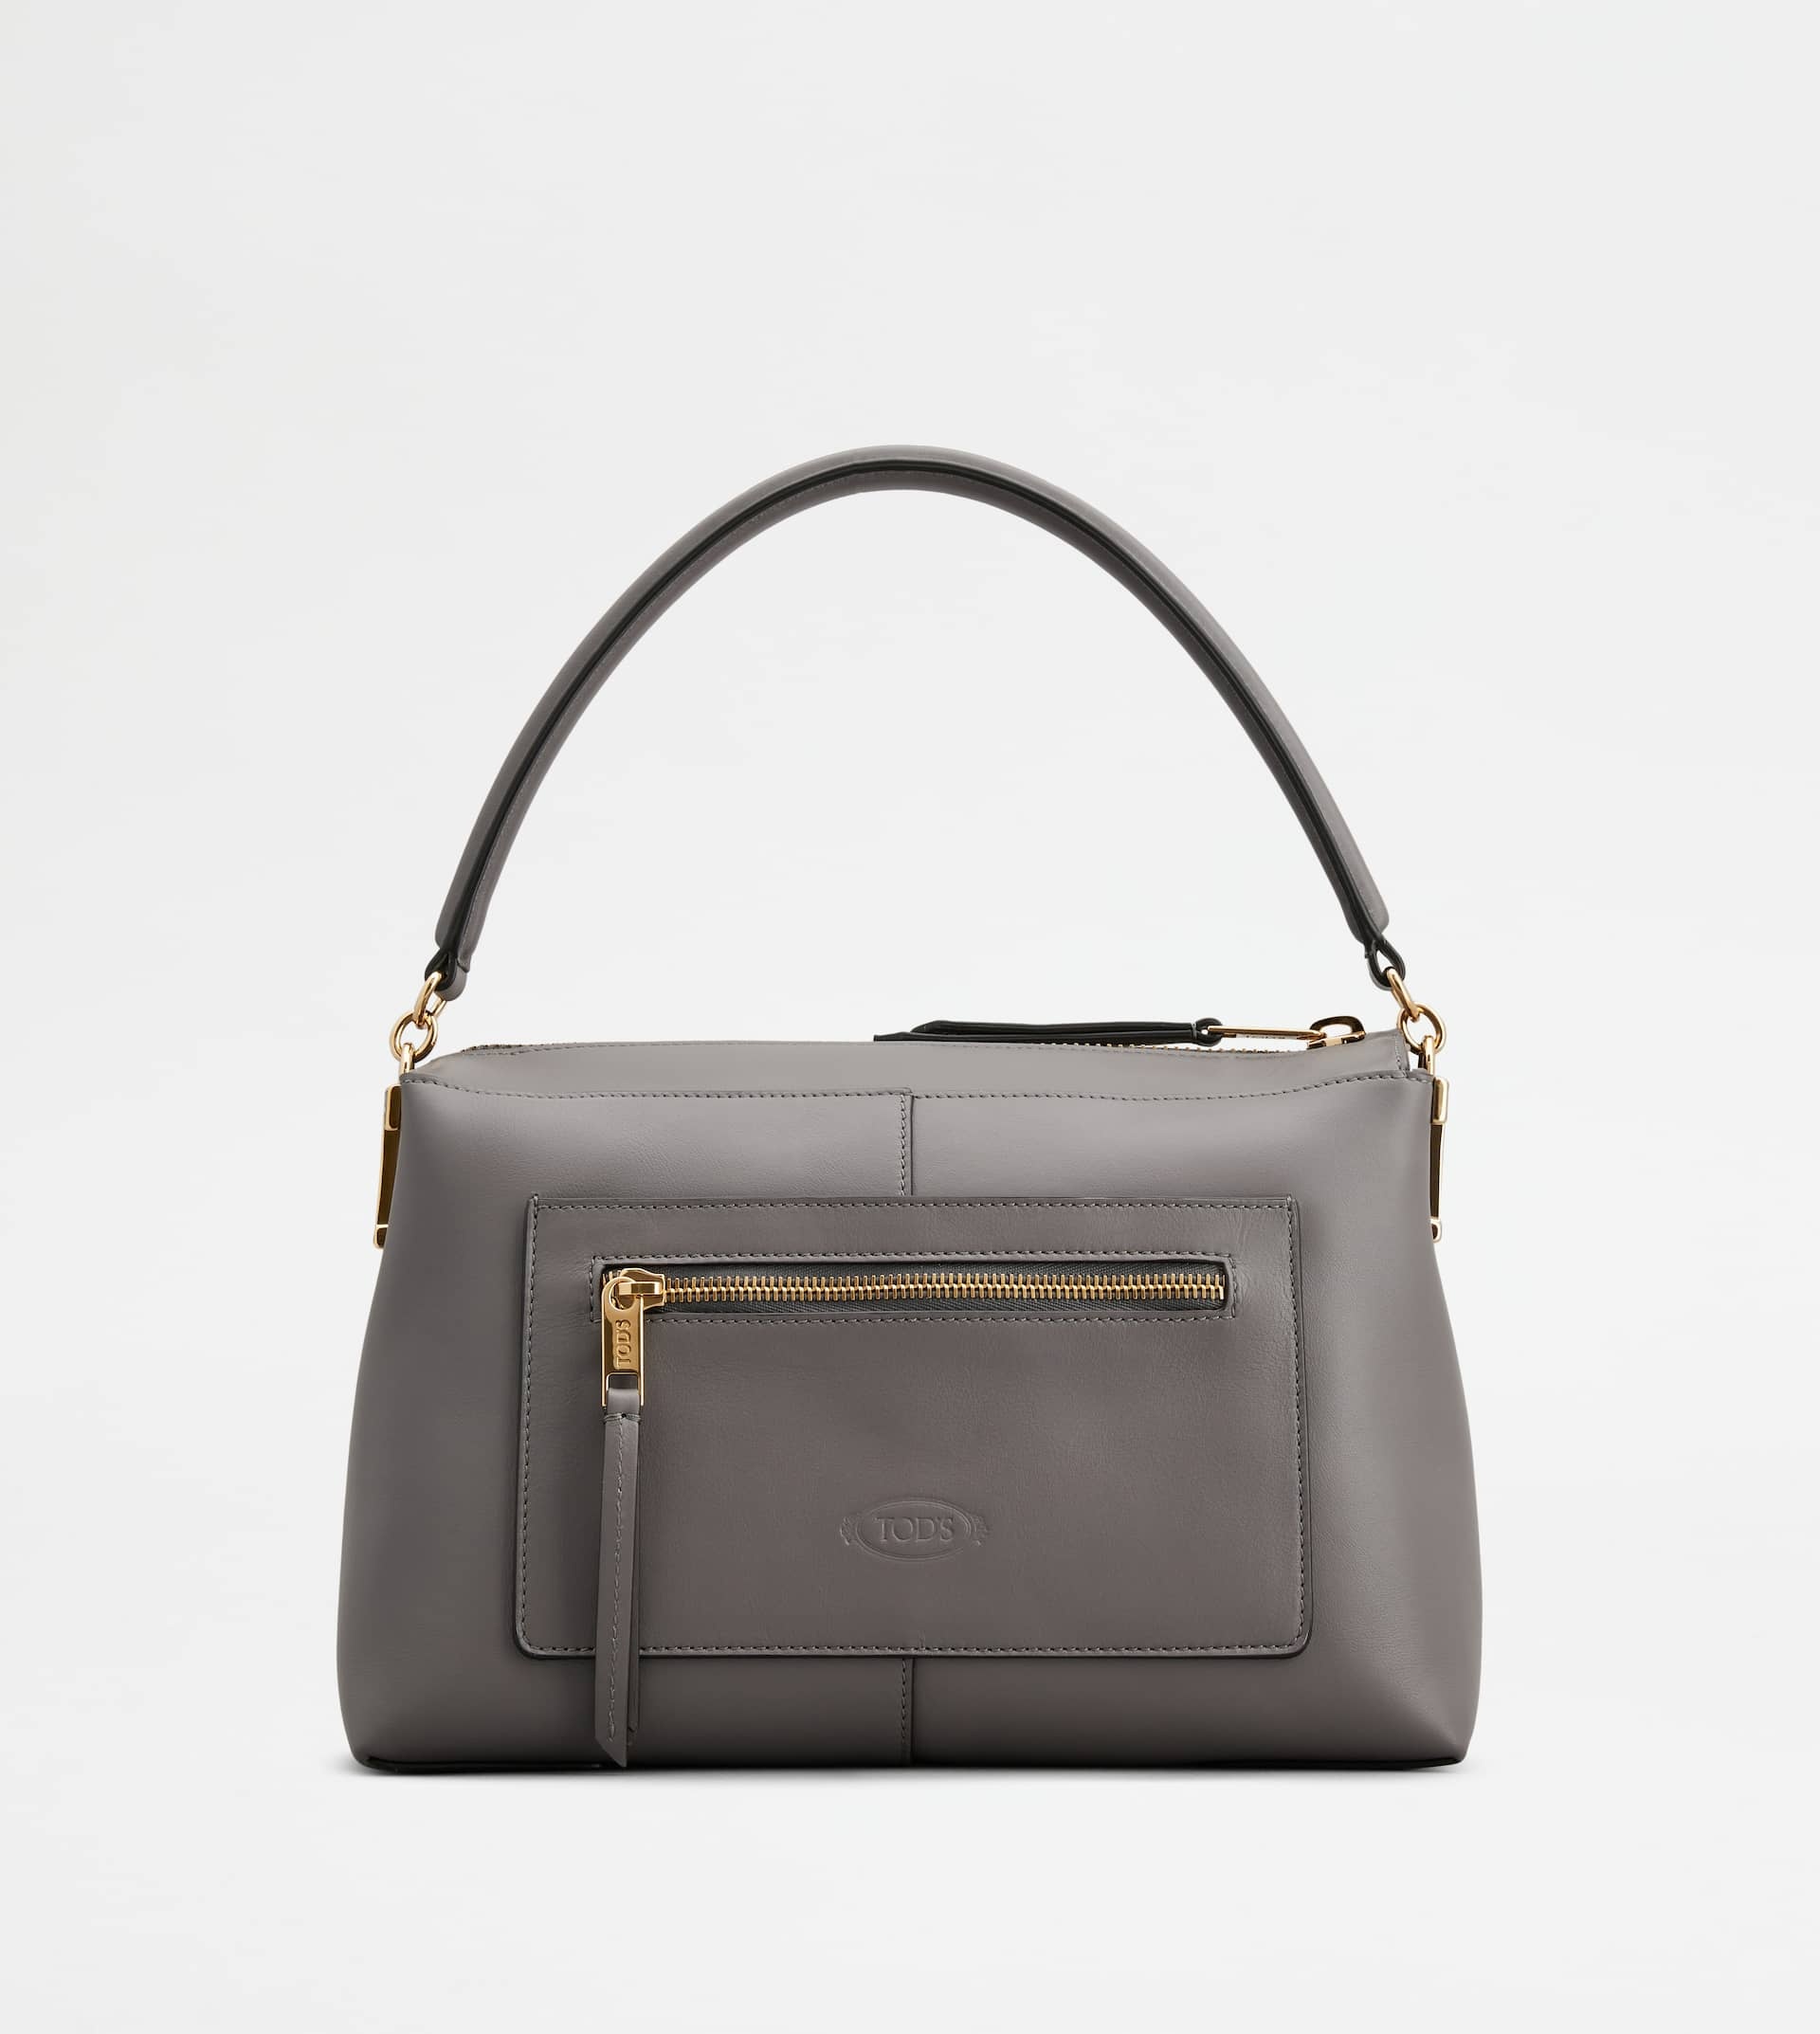 TOD'S T CASE BAULETTO IN LEATHER SMALL - GREY - 4